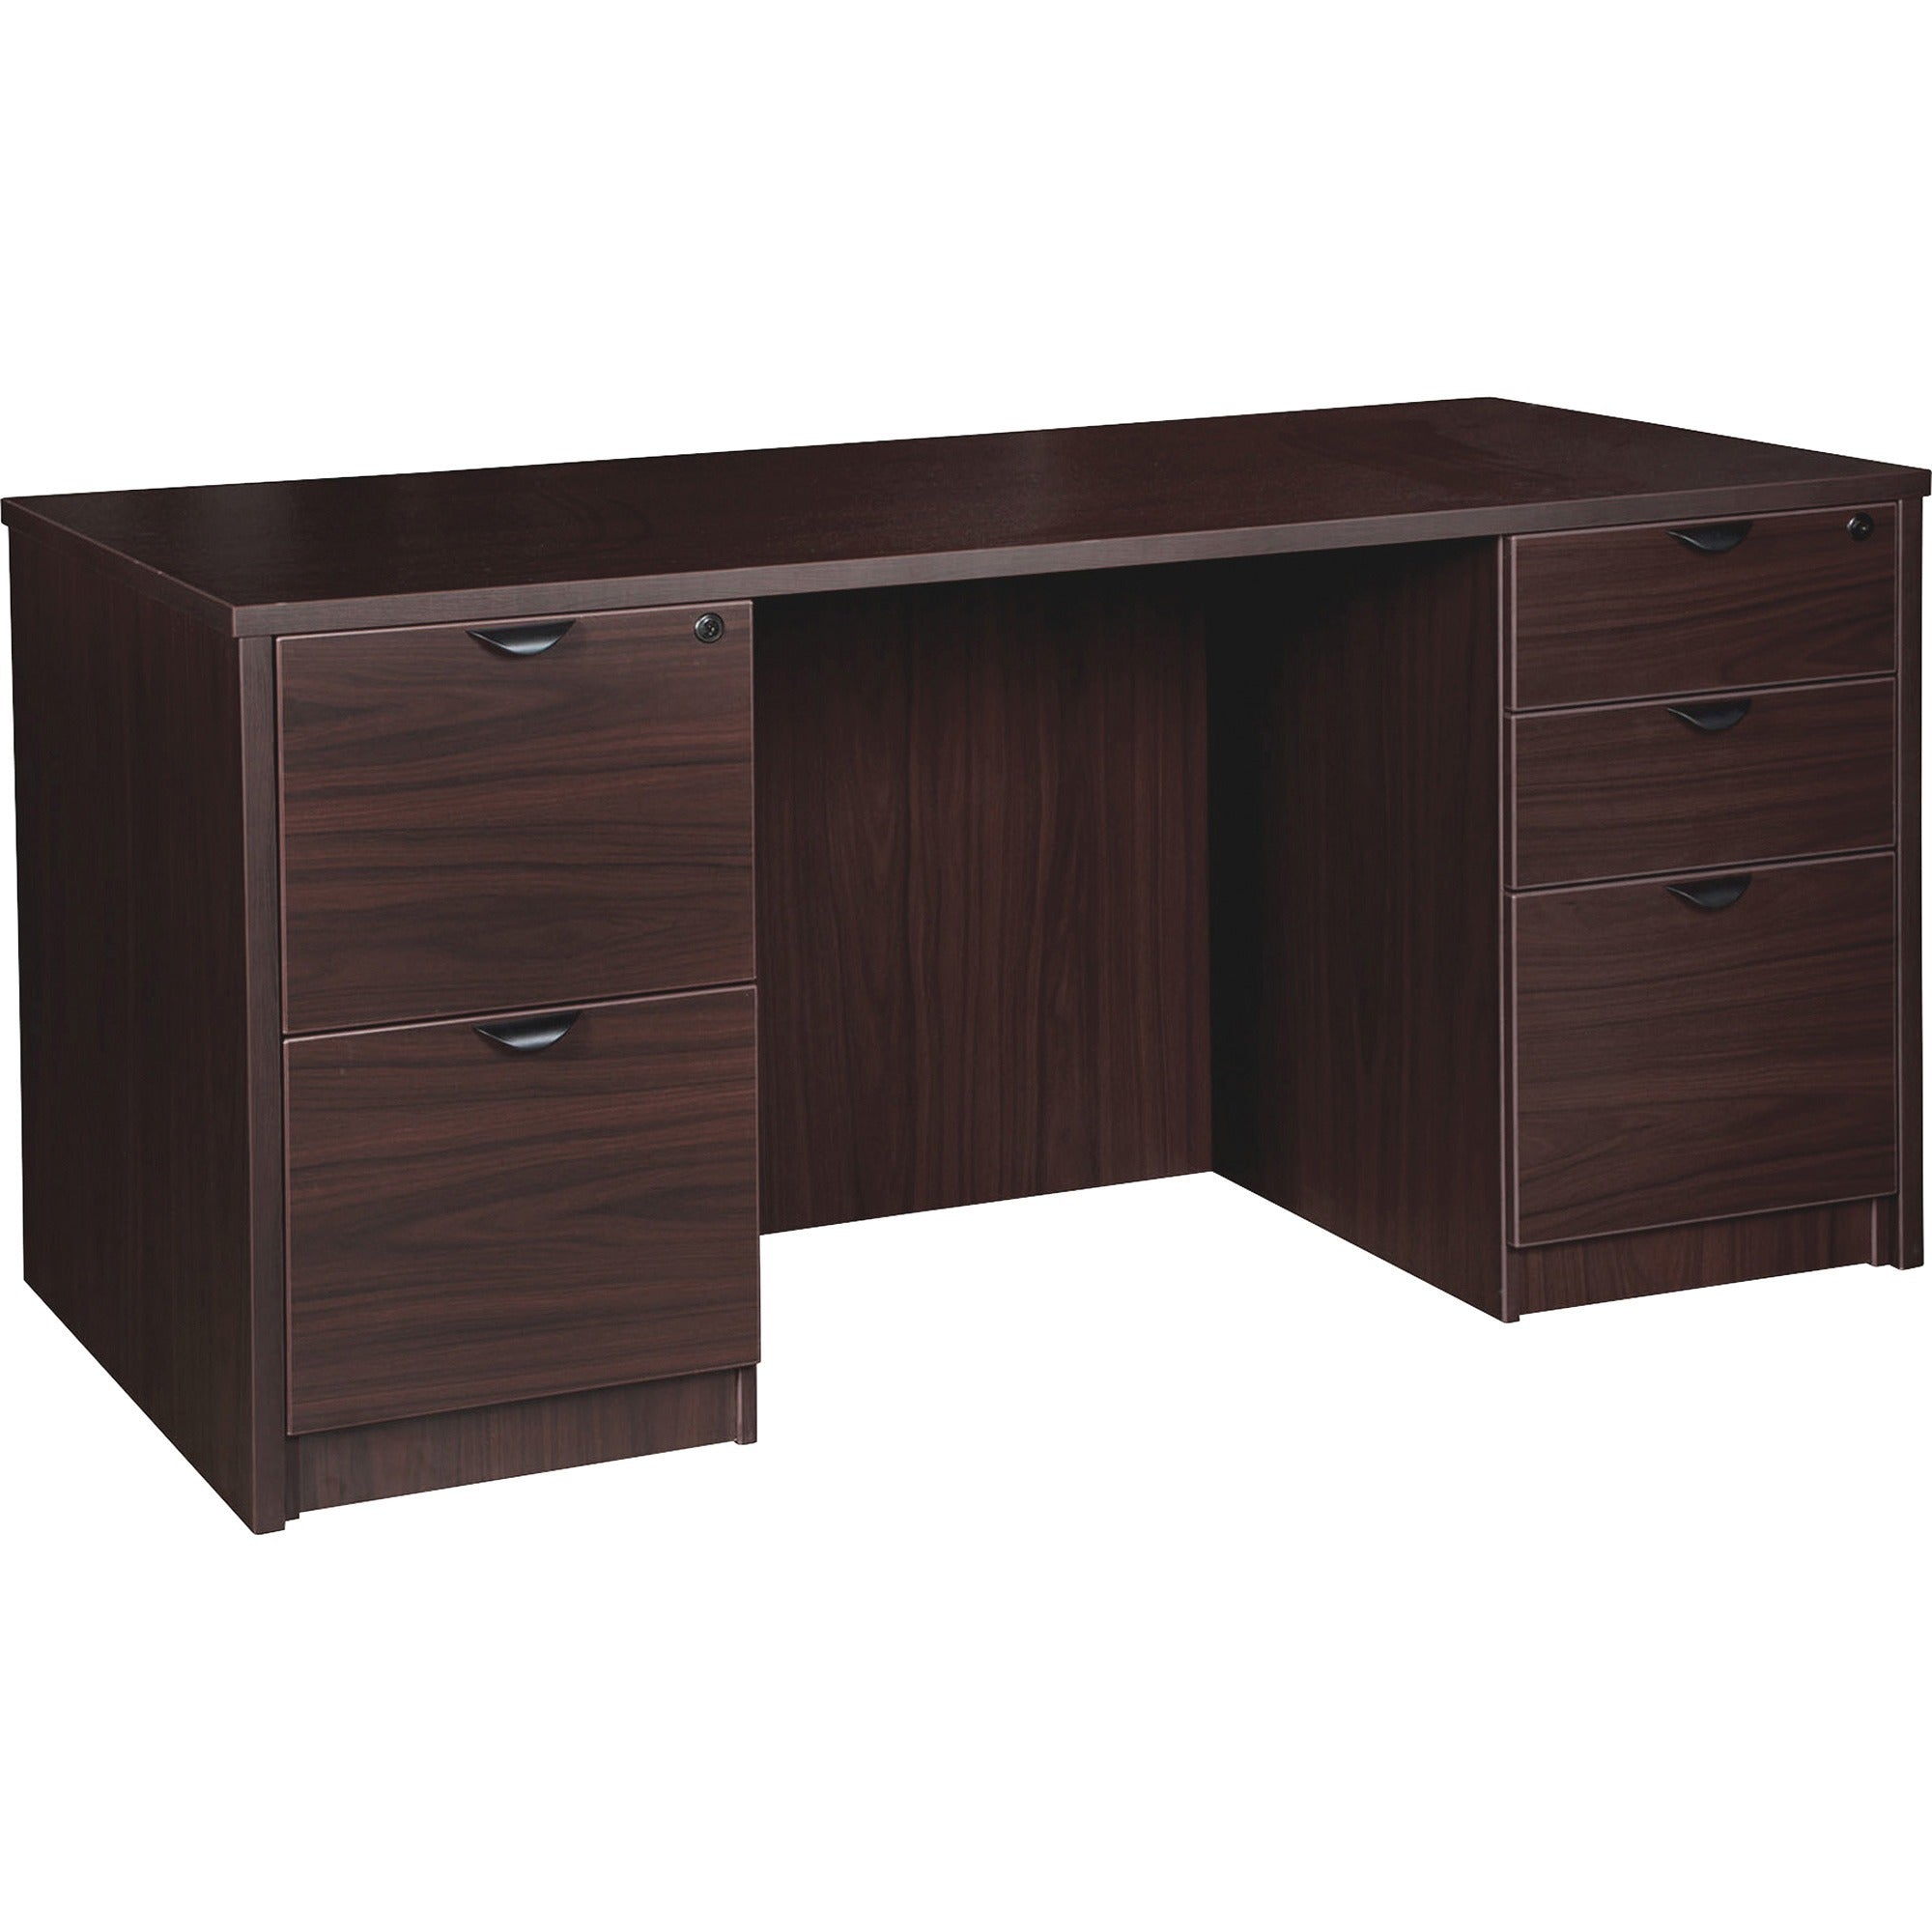 lorell-prominence-20-double-pedestal-desk-1-top-60-x-3029-5-x-file-box-drawers-double-pedestal-on-left-right-side-band-edge-material-particleboard-finish-espresso-laminate-thermofused-melamine-tfm_llrpd3060dpes - 1